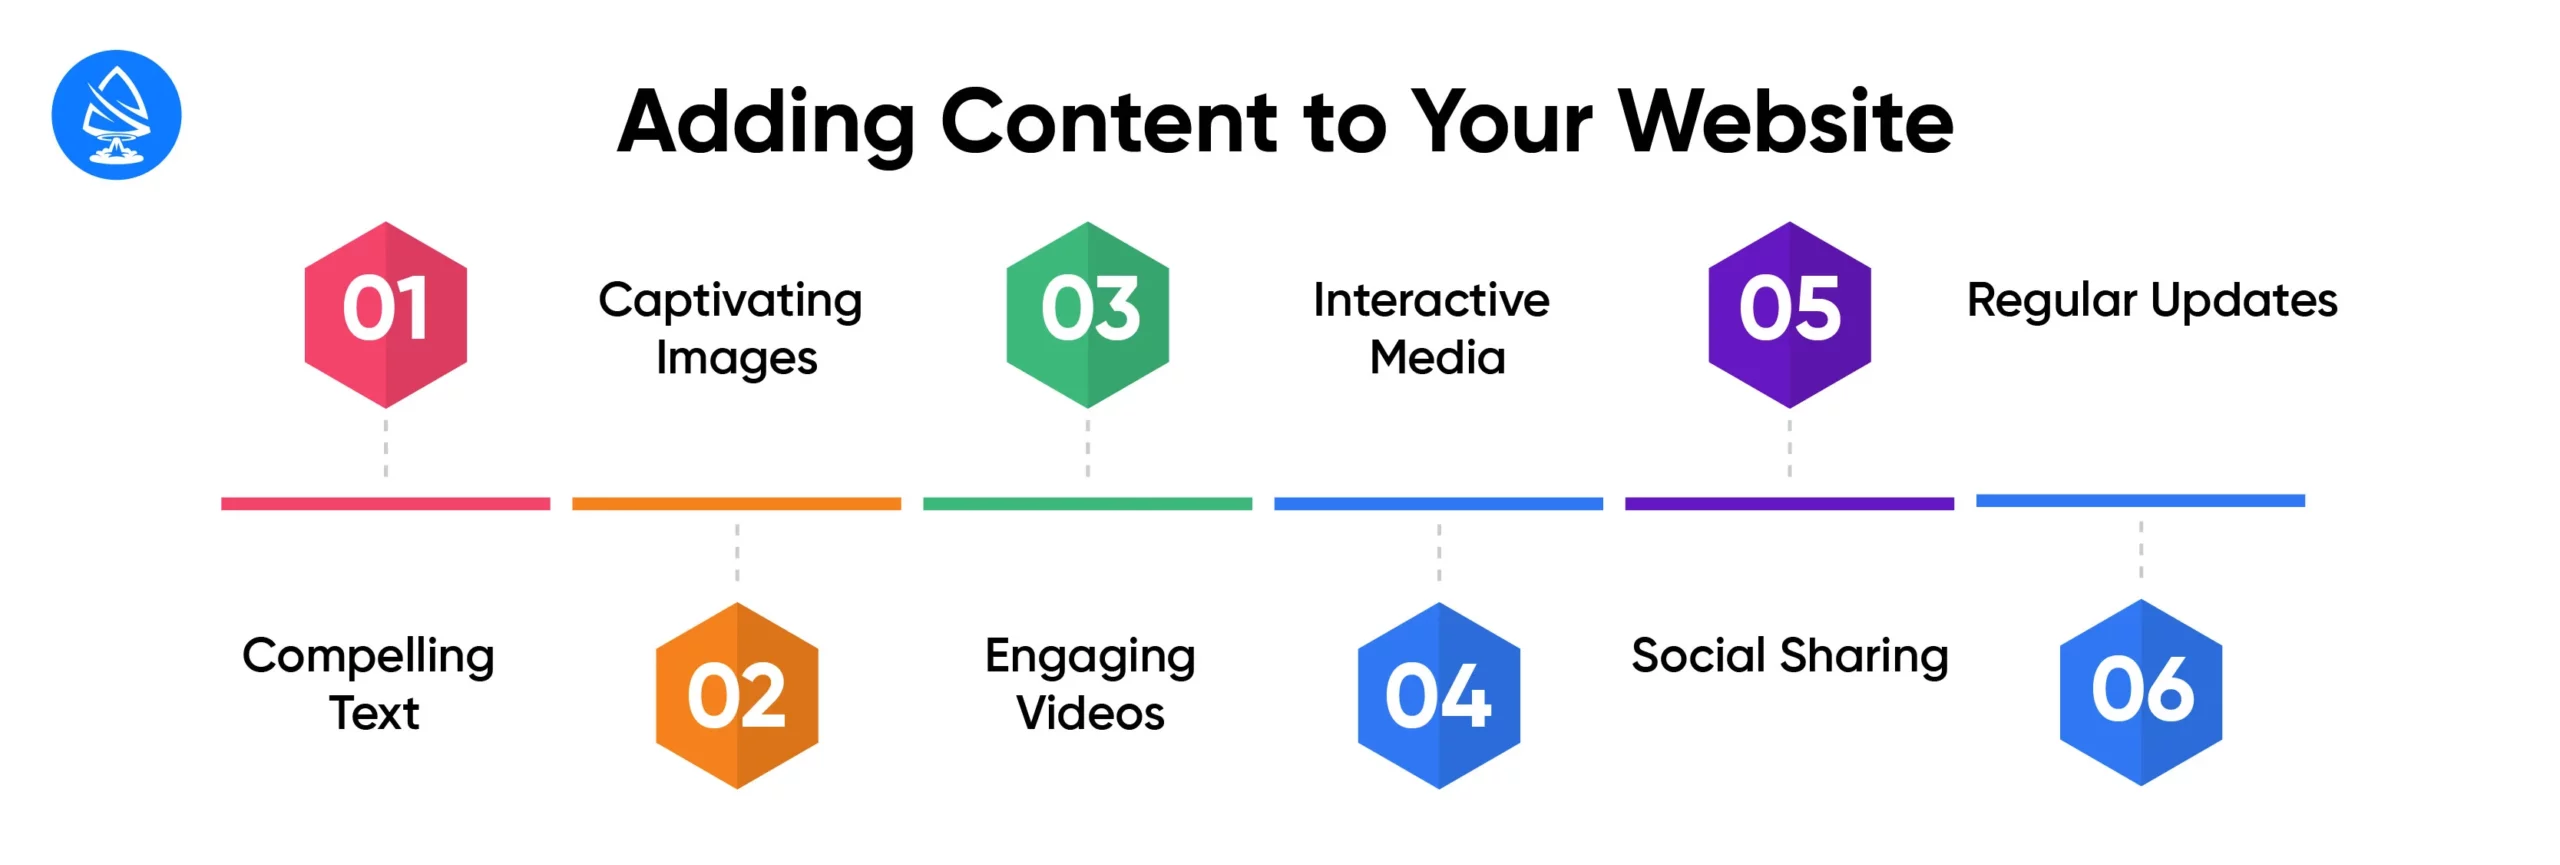 Adding Content to Your Website 